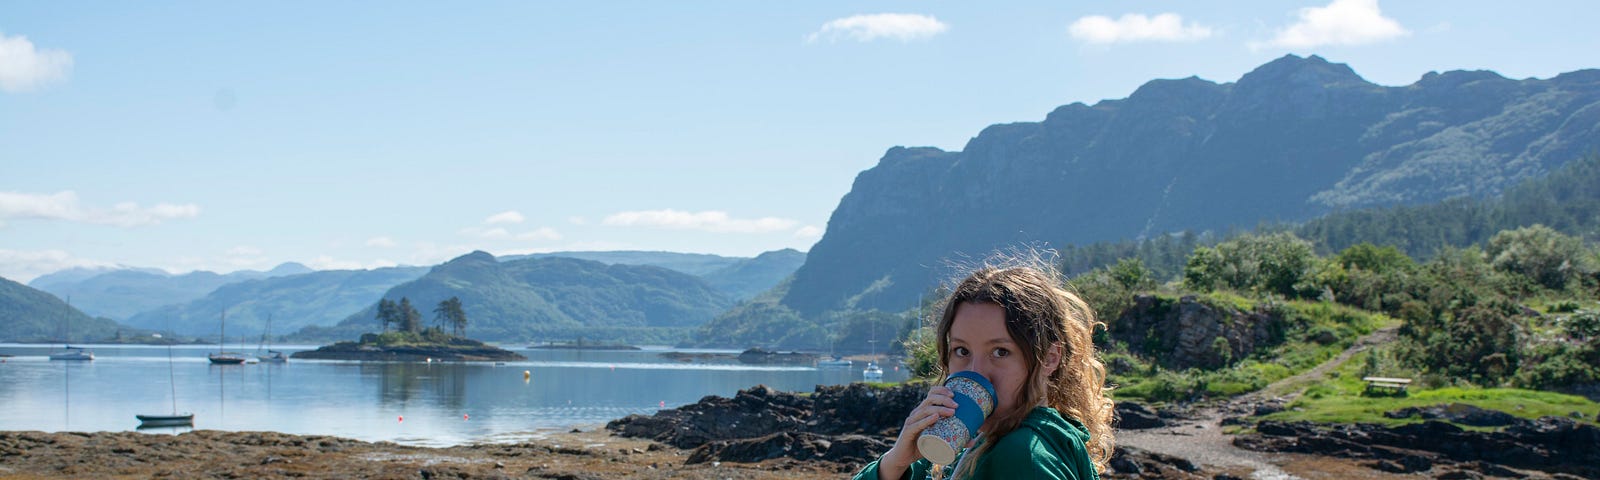 a young woman drinking coffee, a lake and mountains in the background